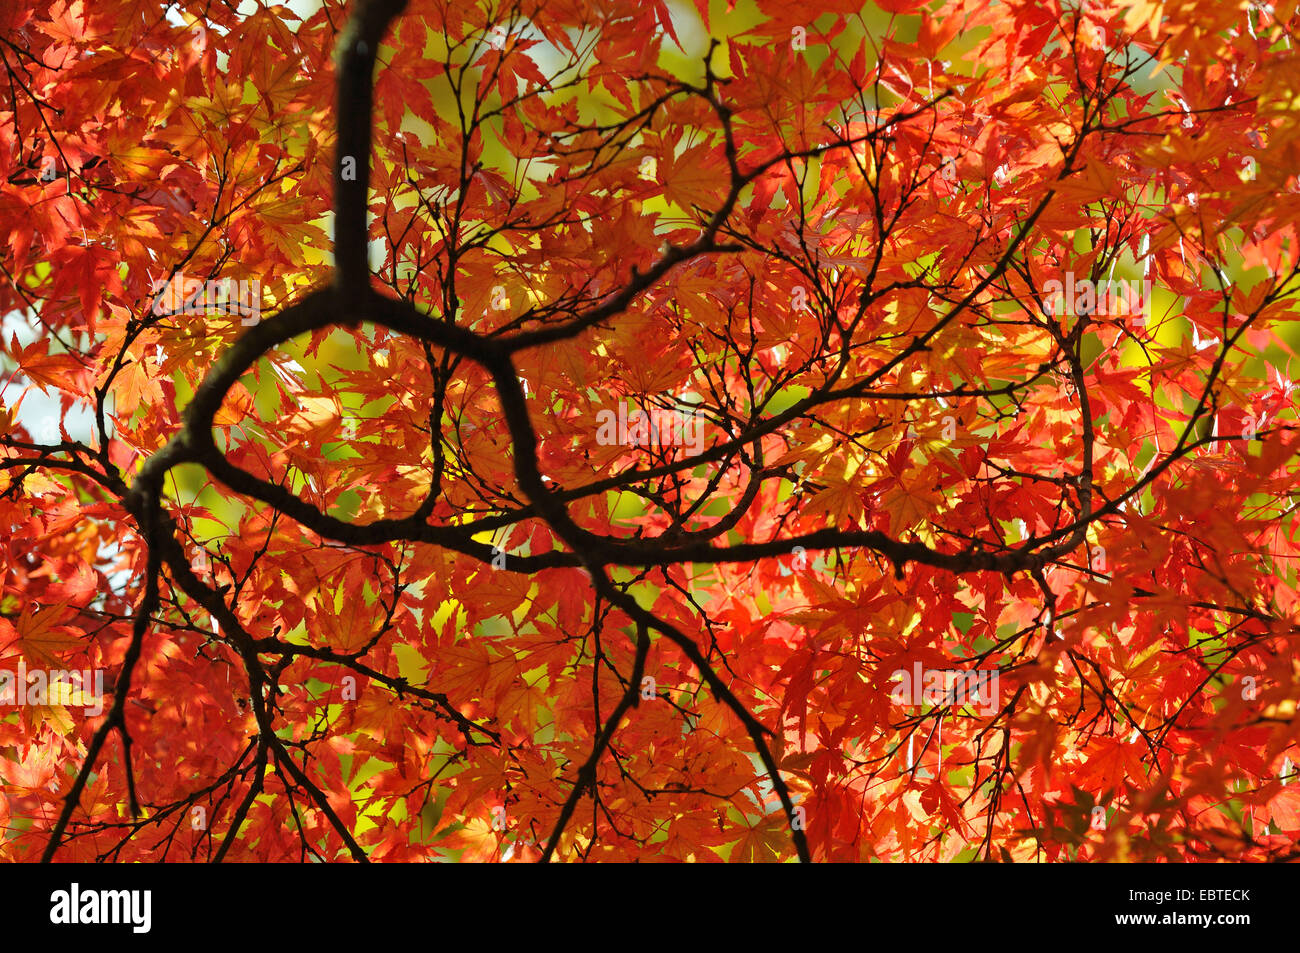 Japanese maple (Acer palmatum), branches with autumn leaves, deuschland Stock Photo